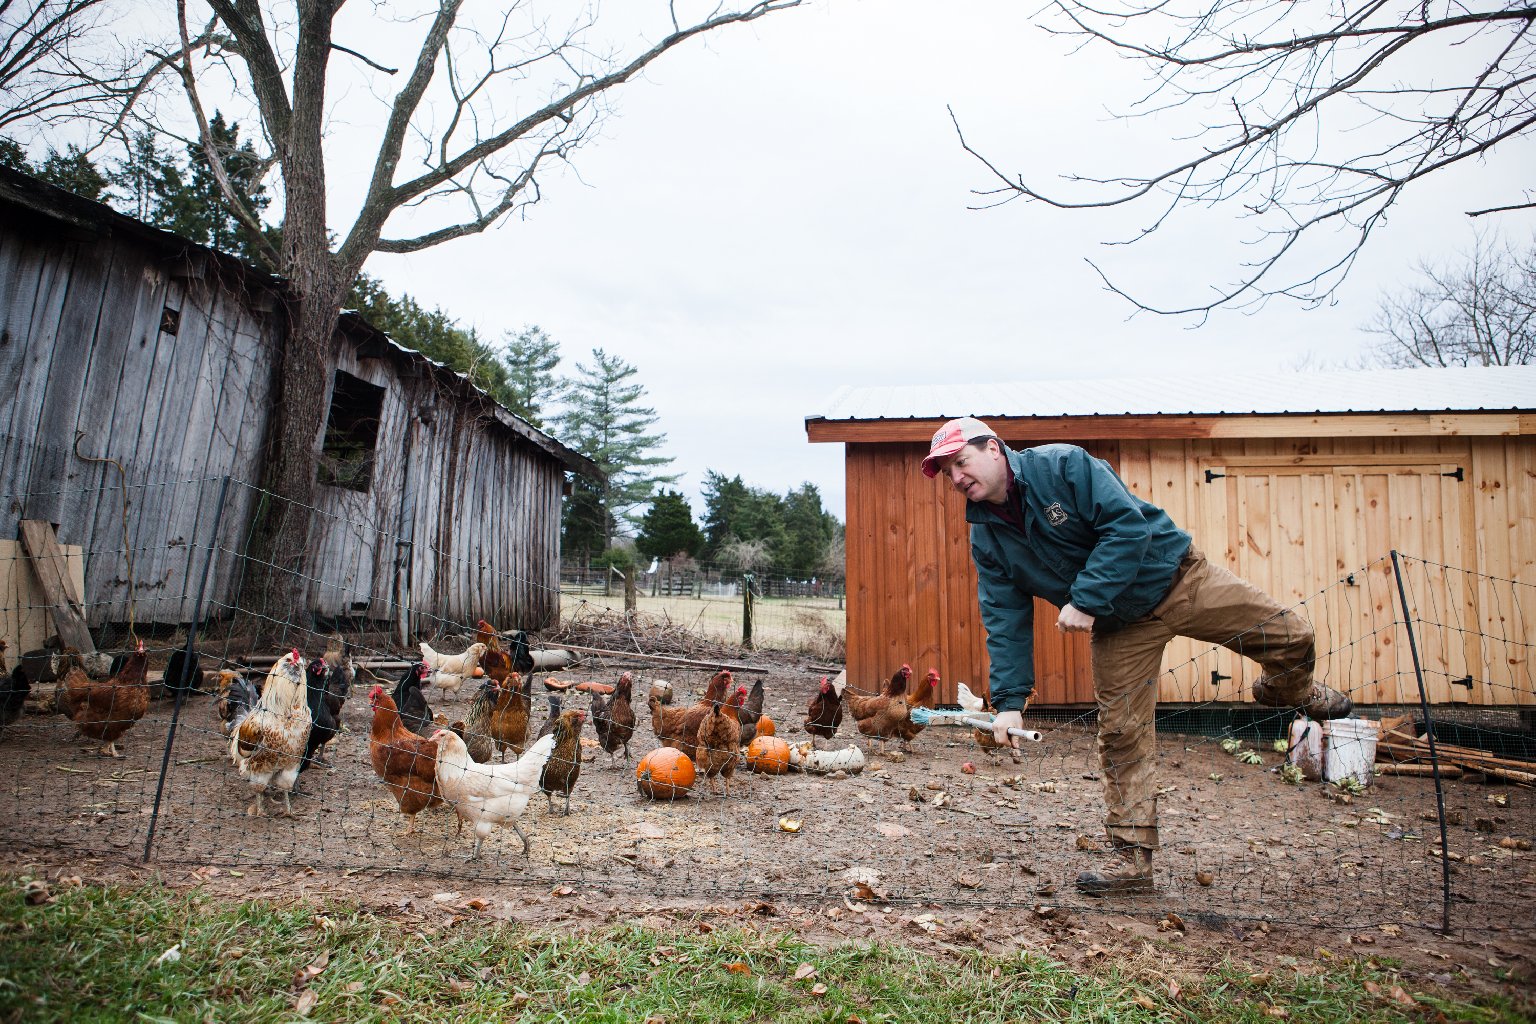 Guerre has nearly finished building his new chicken coop. The old one, on the left, has seen better days. Photo: Zac Visco for NPR 